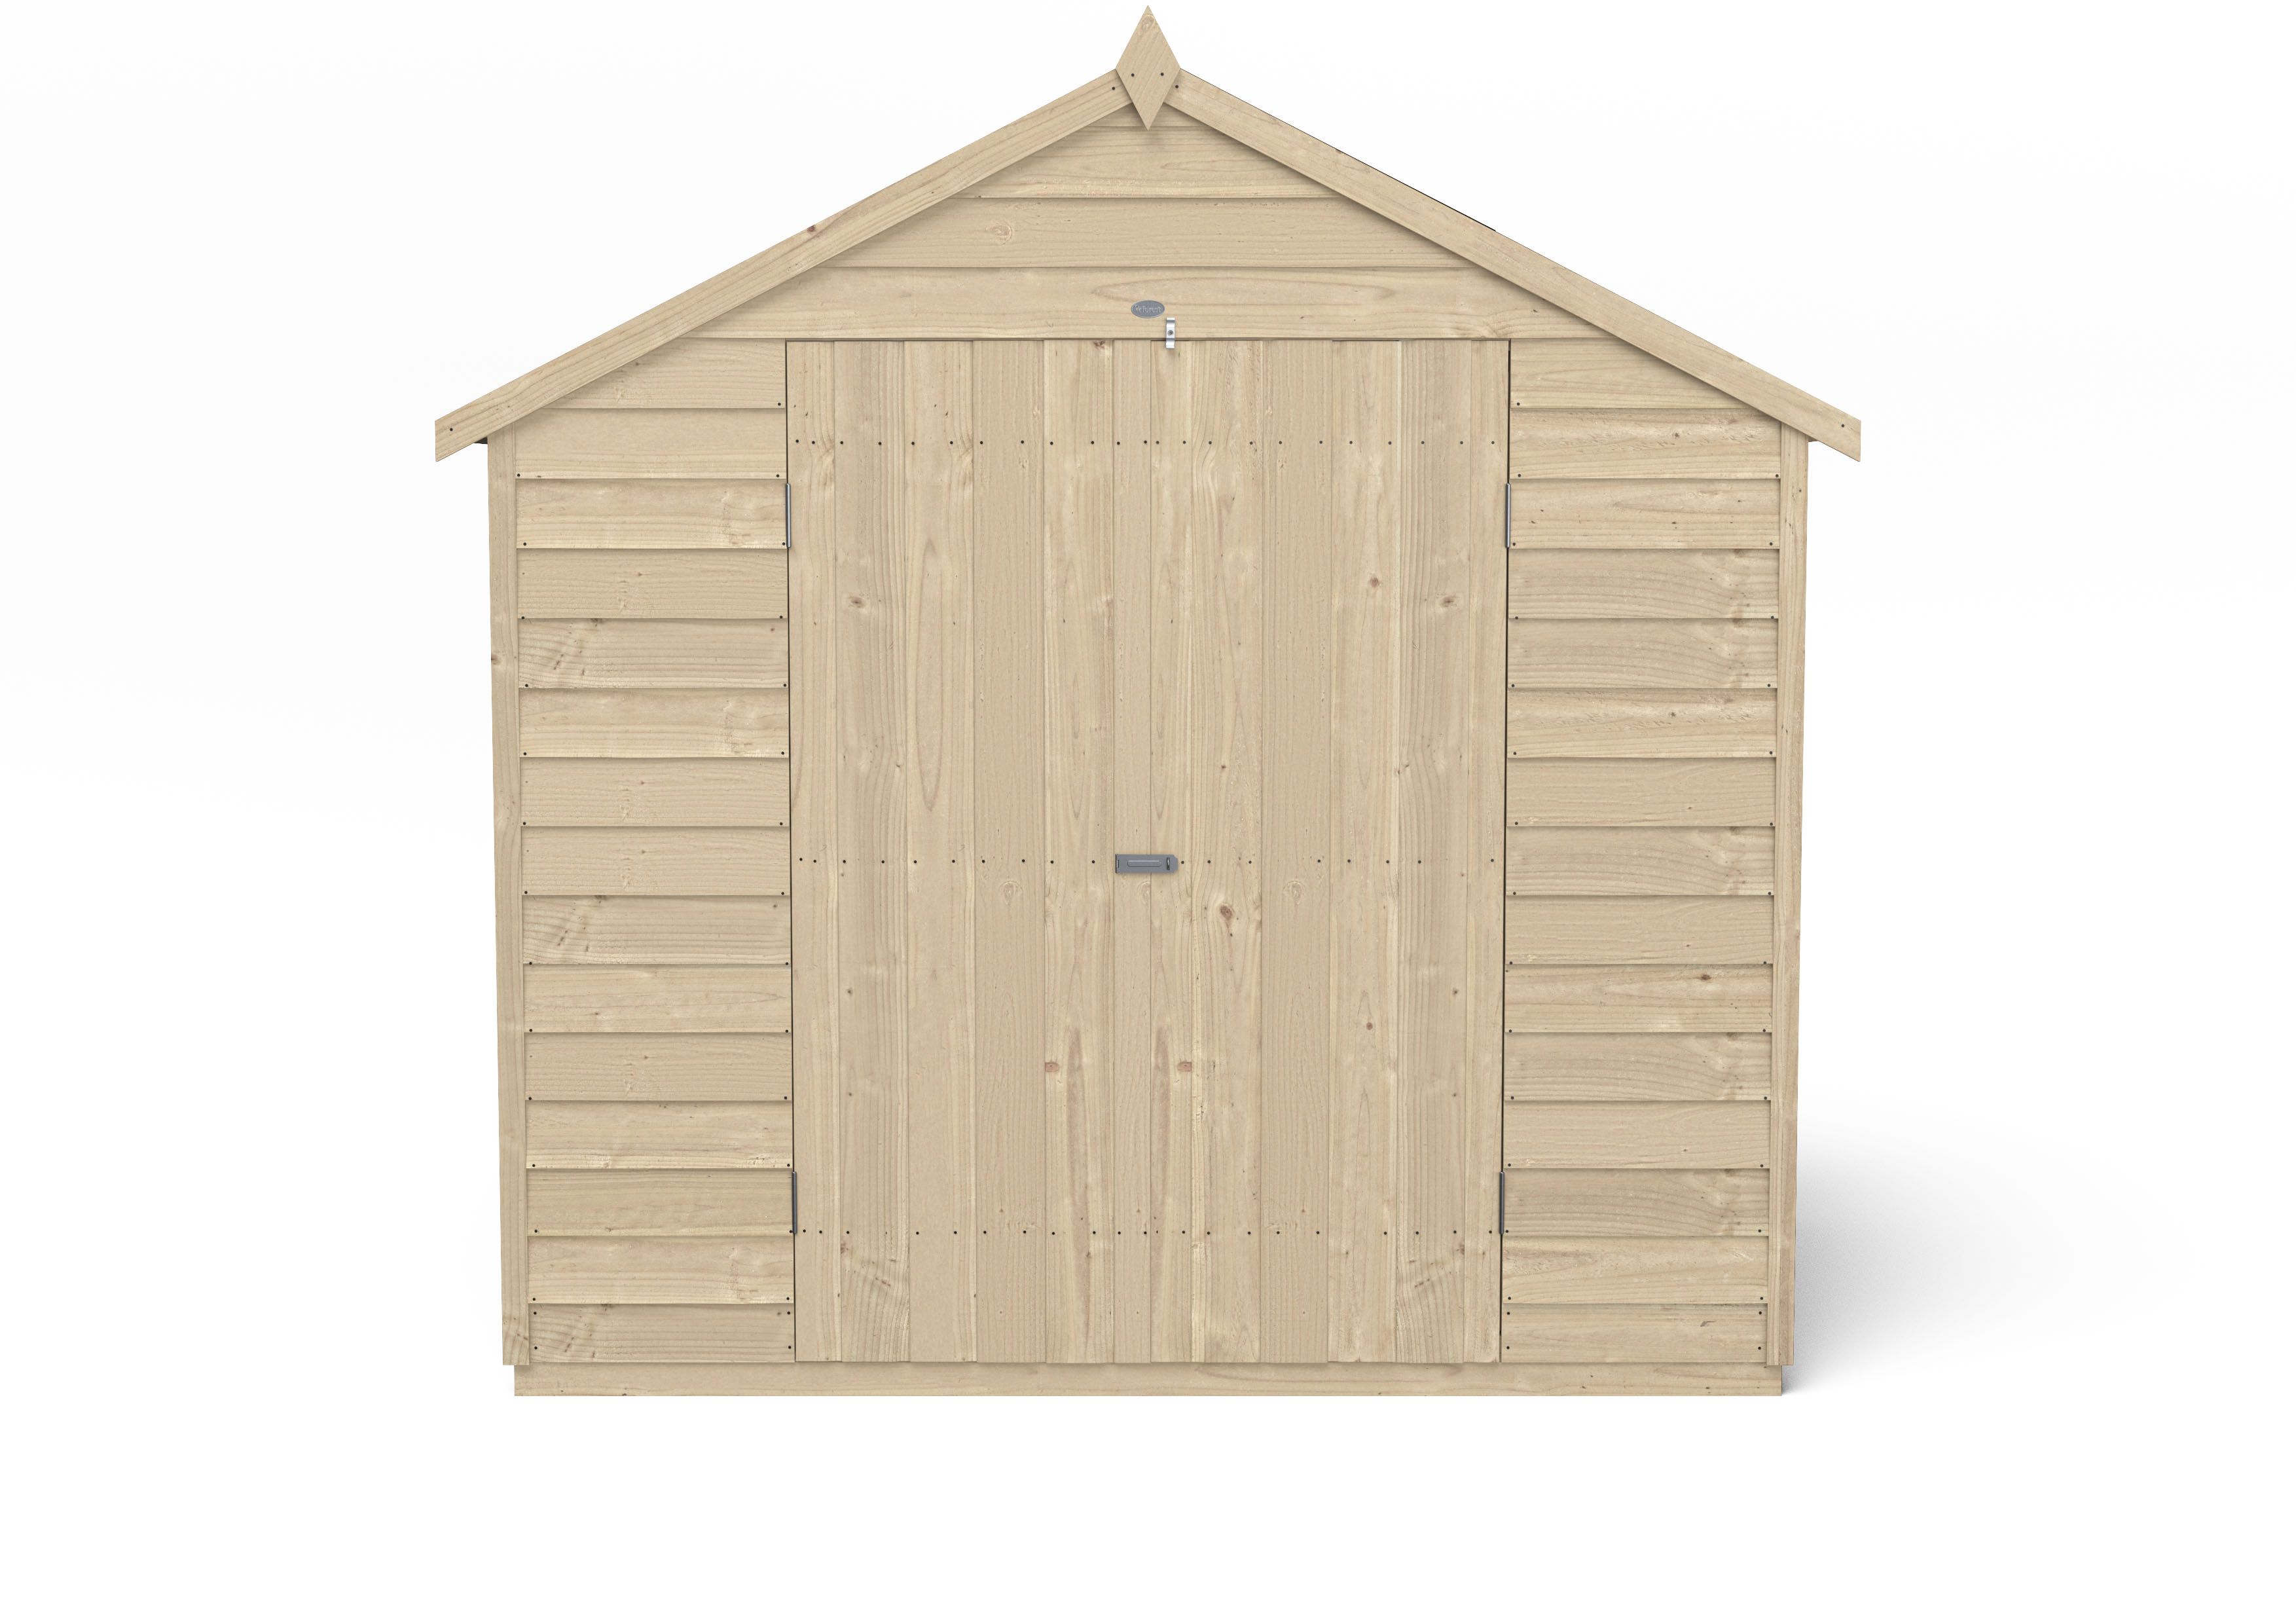 Forest Garden Overlap 7x5 ft Apex Wooden Pressure treated 2 door Shed with floor & 1 window (Base included)